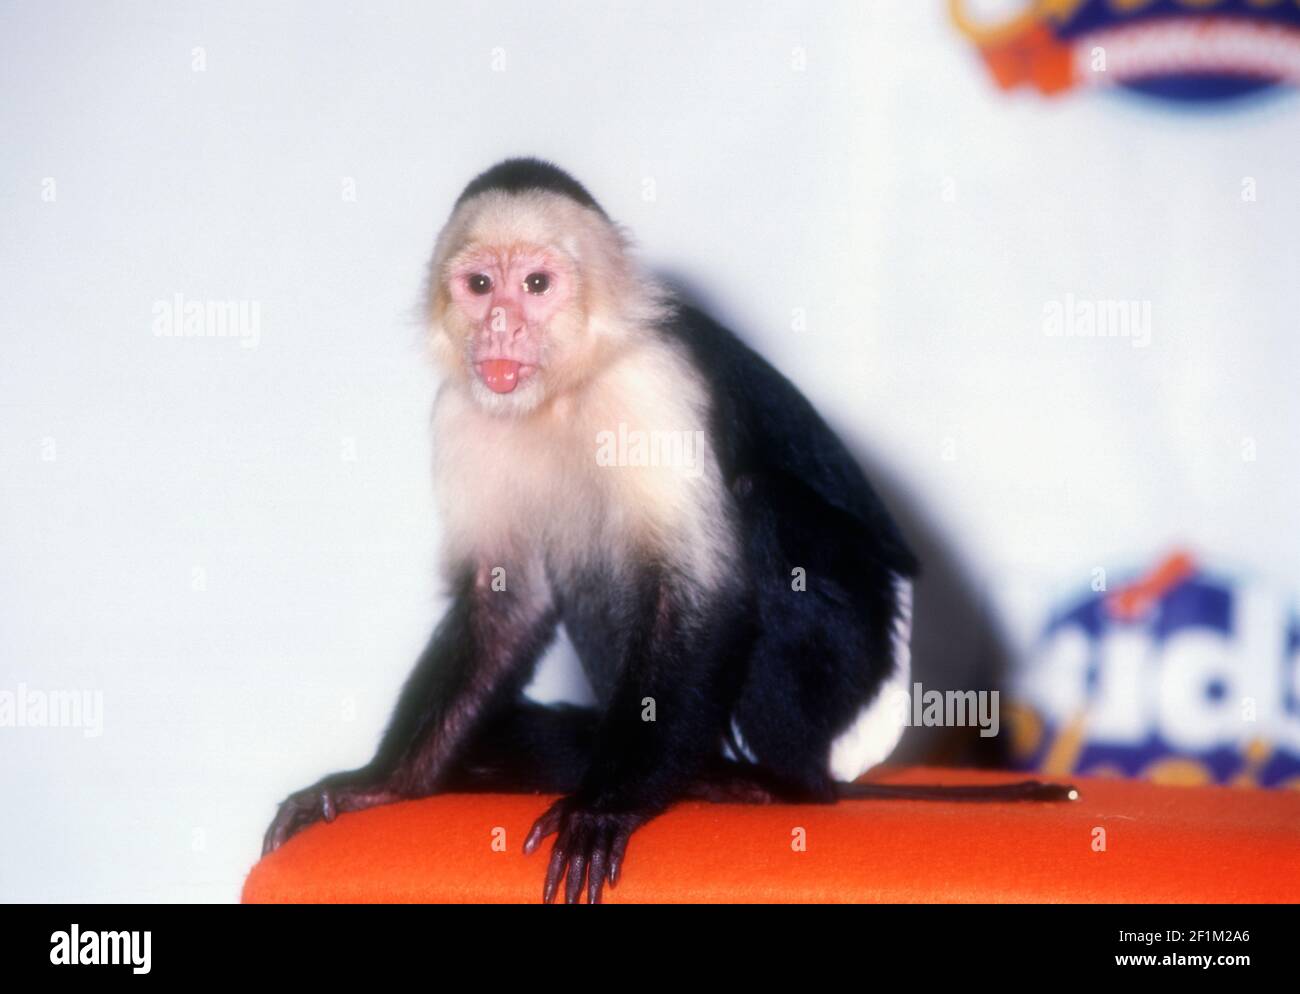 Universal City, California, USA 11th May 1996 Marcel the Monkey from Friends TV Show attends the Ninth Annual Nickelodeon's Kids' Choice Awards on May 11, 1996 at Universal Studios in Universal City, California, USA. Photo by Barry King/Alamy Stock Photo Stock Photo